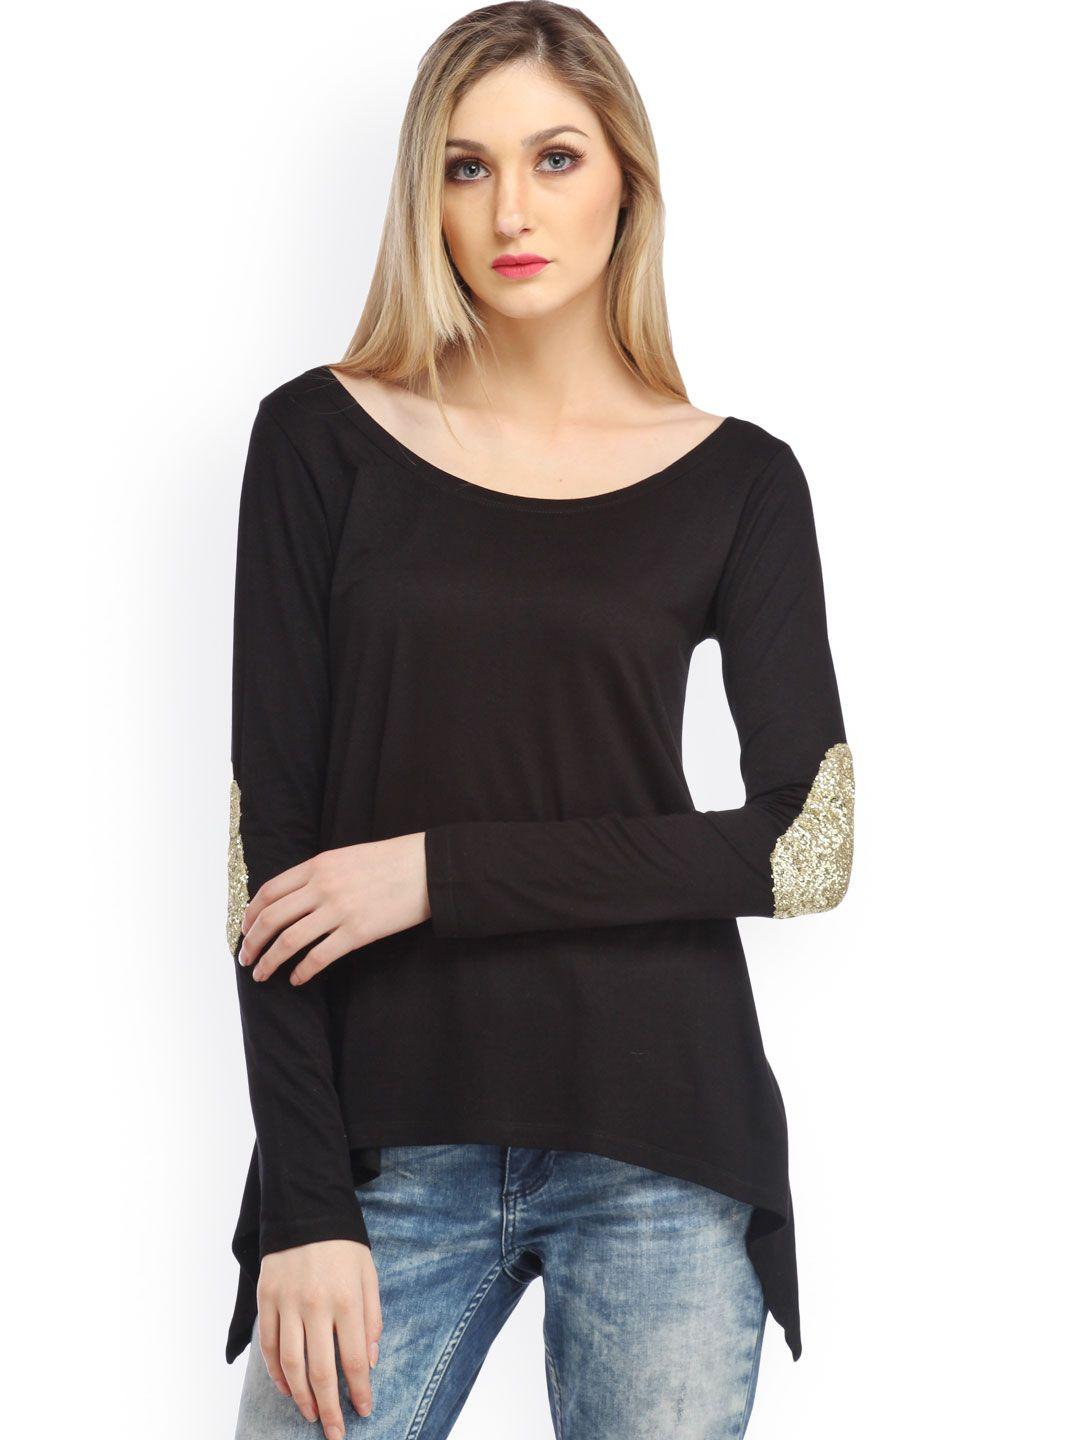 cation black top